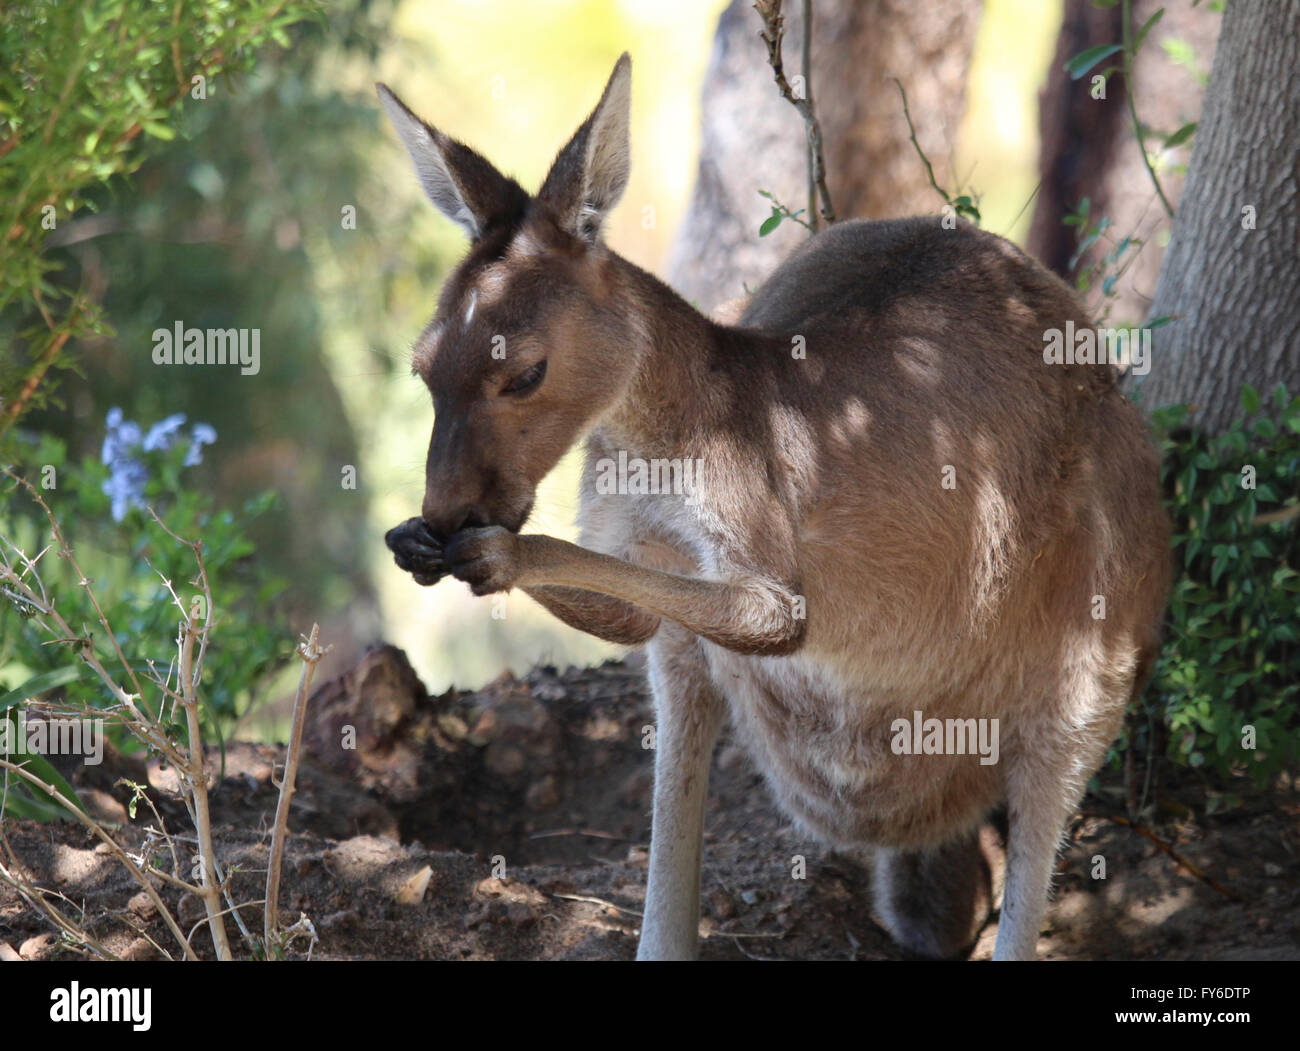 A female kangaroo stops to eat in a woodland setting Stock Photo